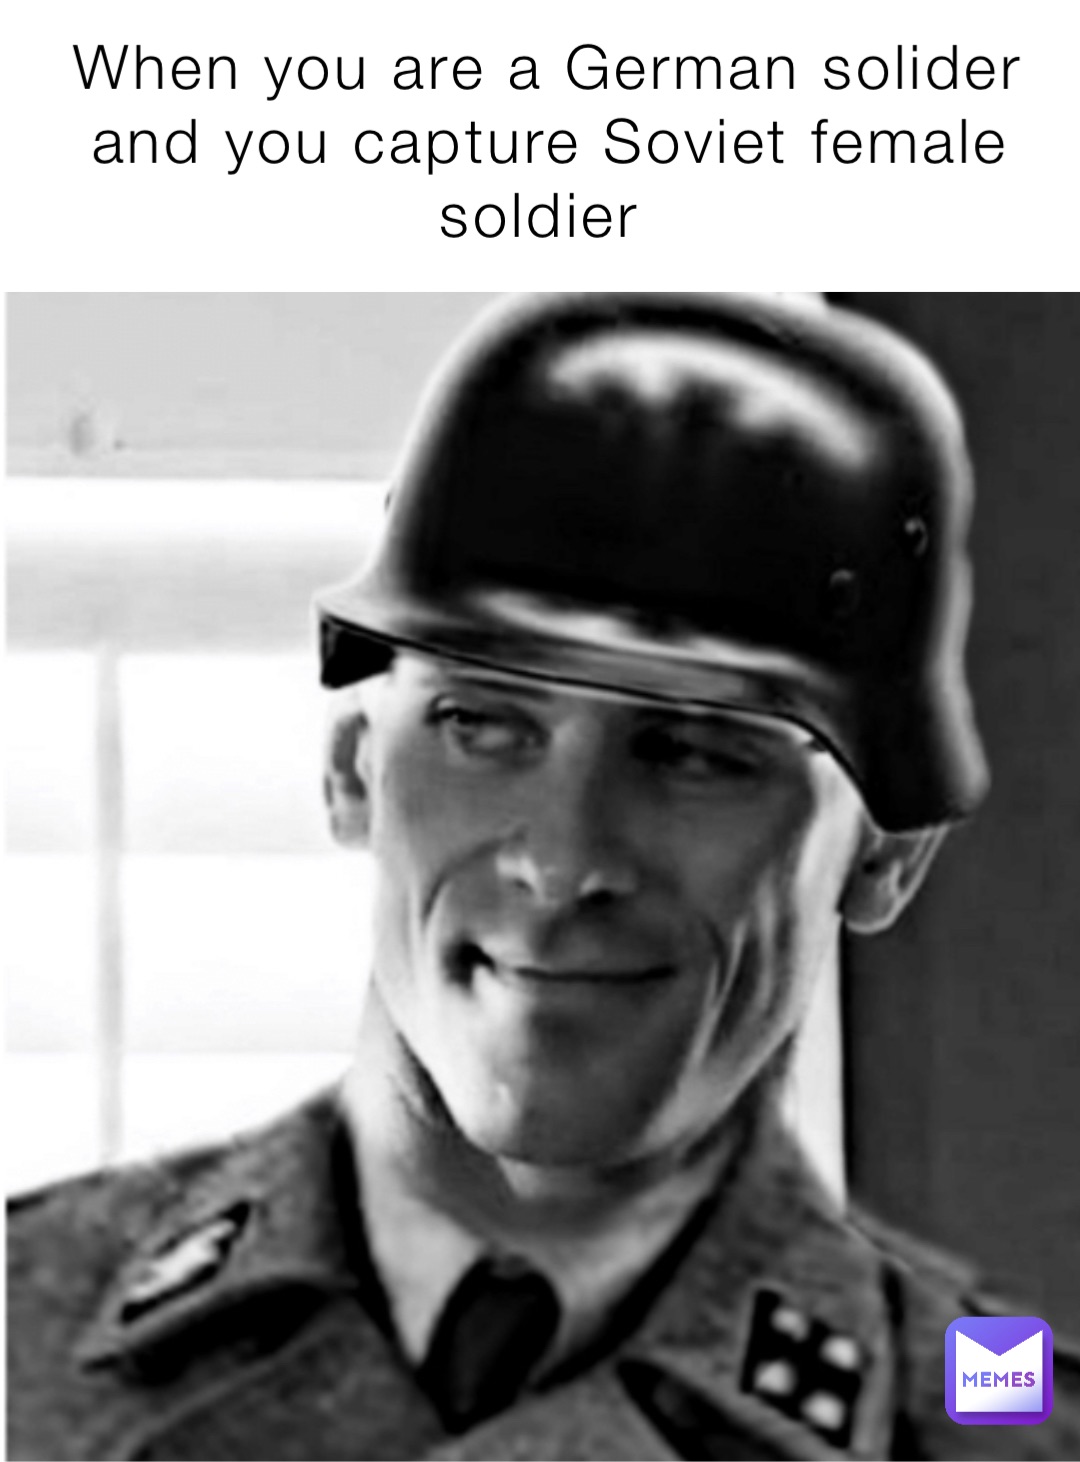 When you are a German solider and you capture Soviet female soldier